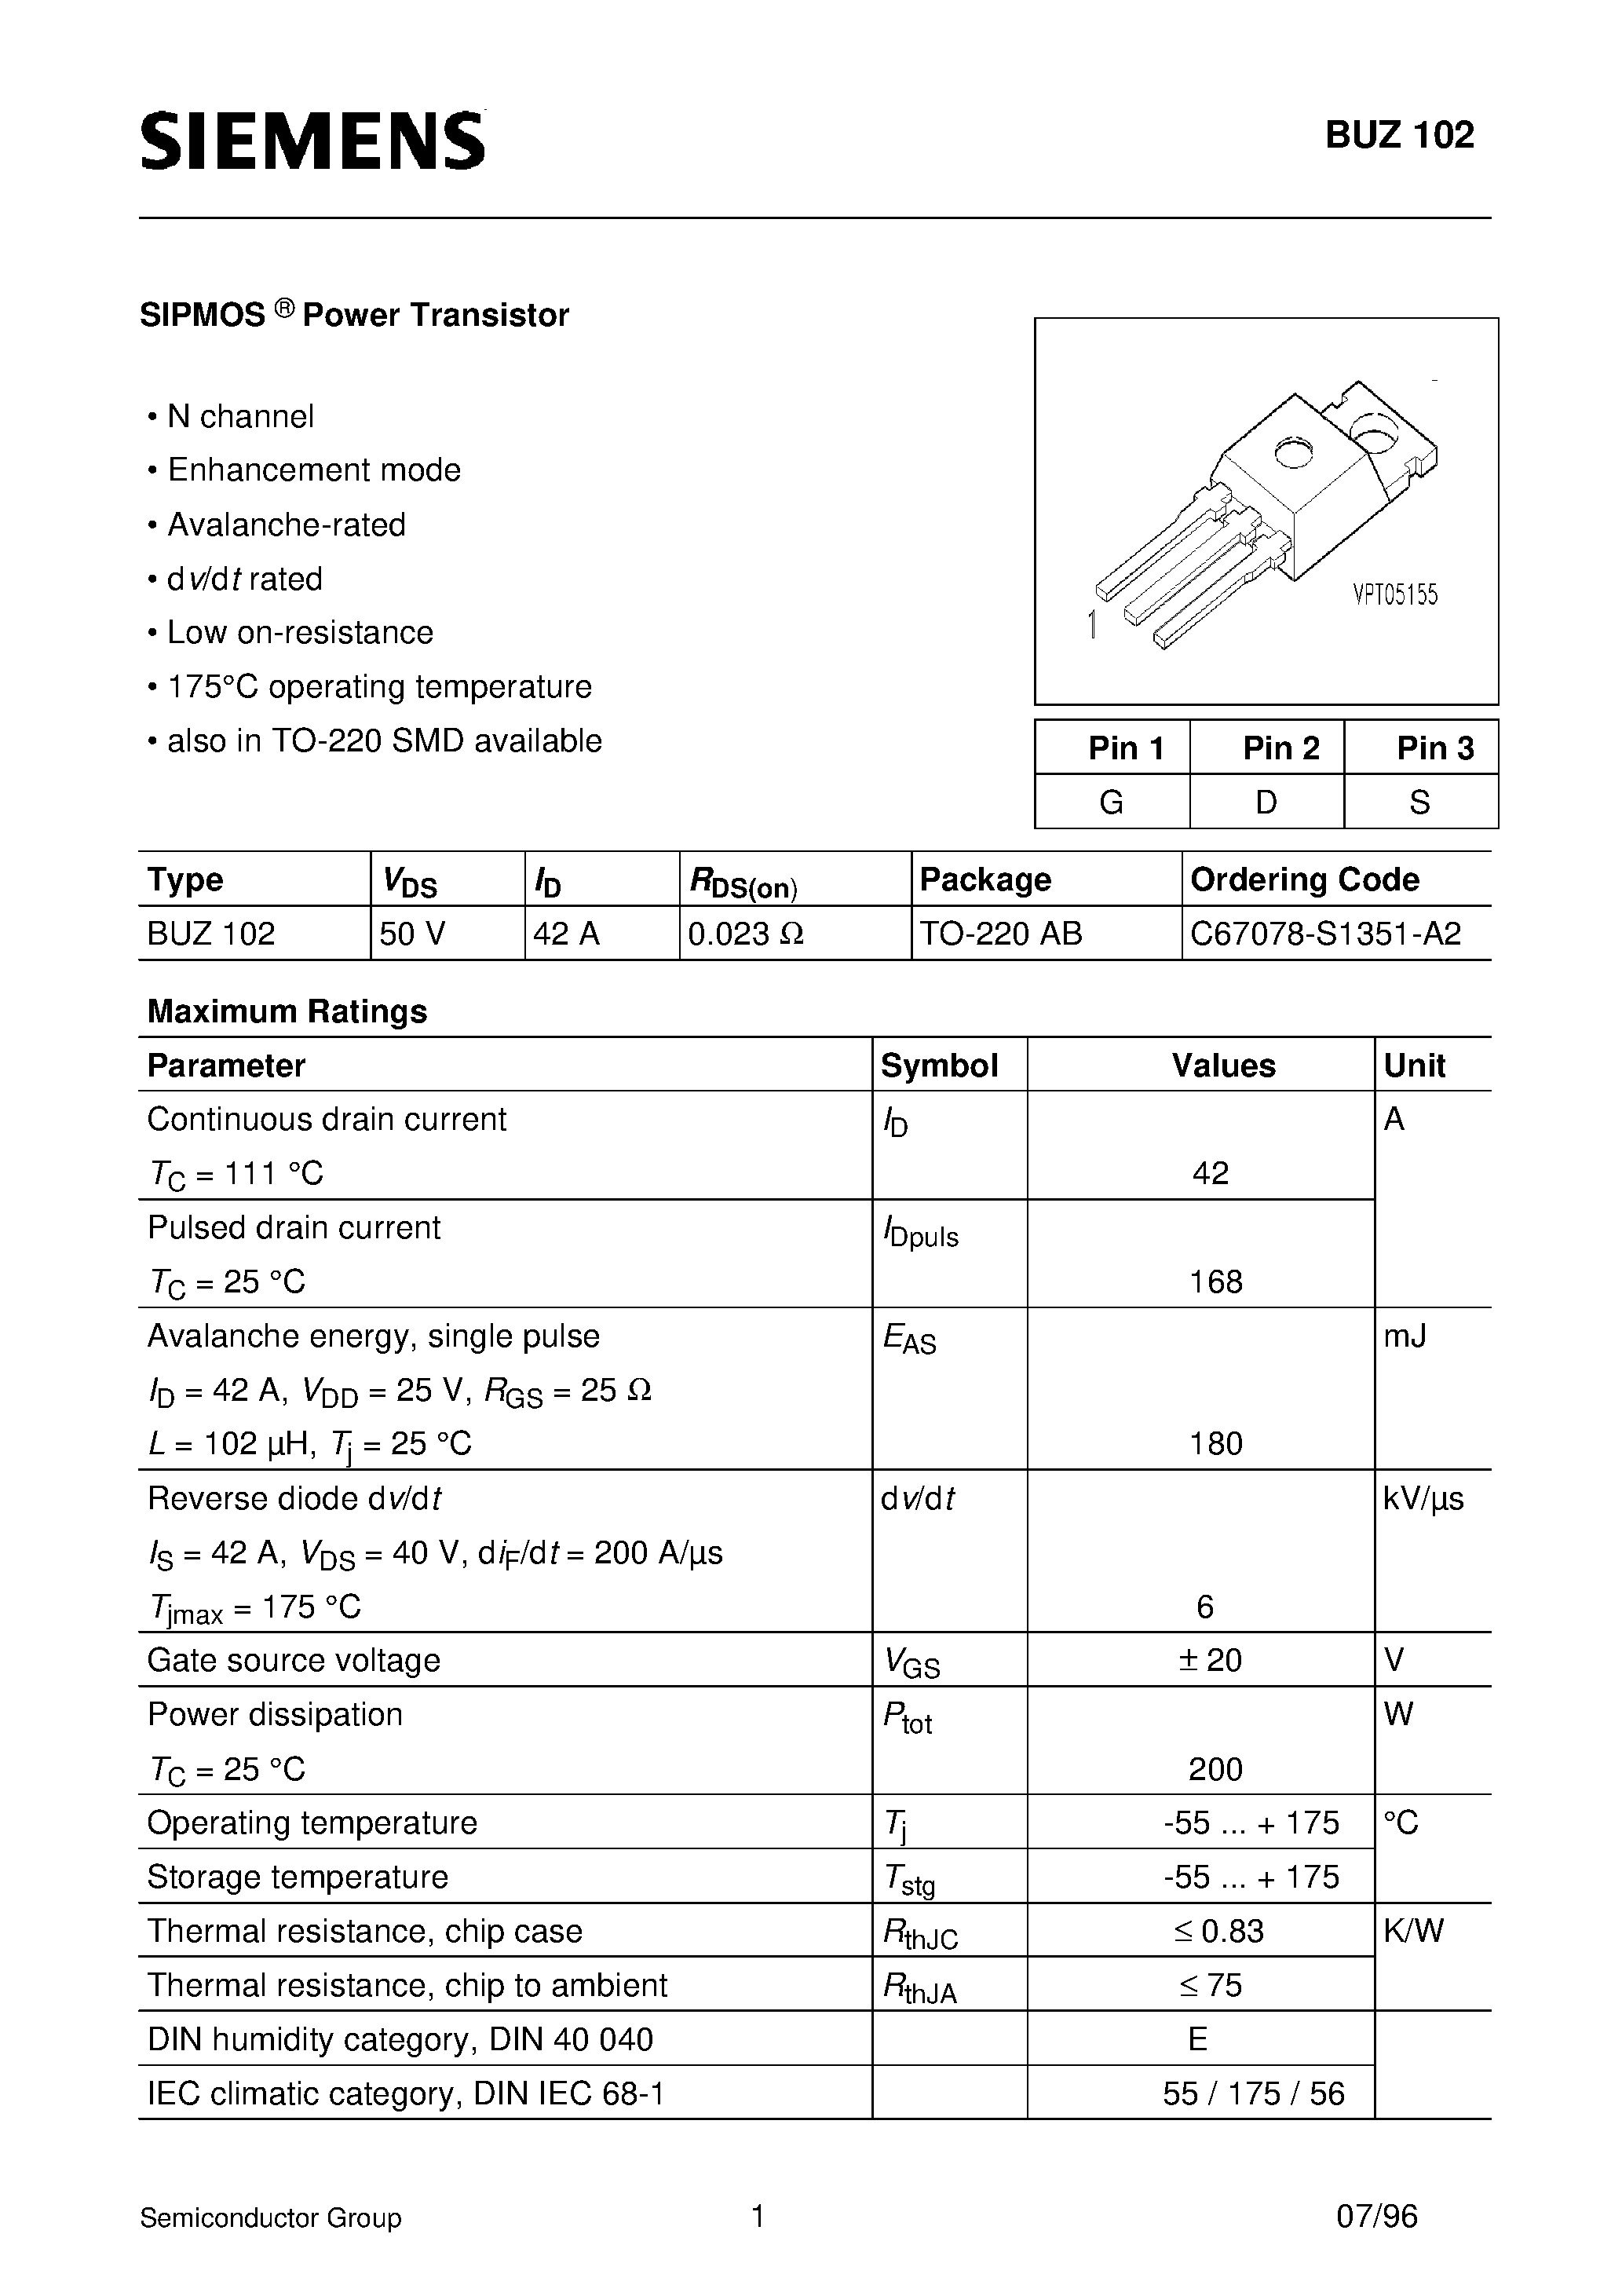 Datasheet BUZ102 - SIPMOS Power Transistor (N channel Enhancement mode Avalanche-rated d v/d t rated) page 1